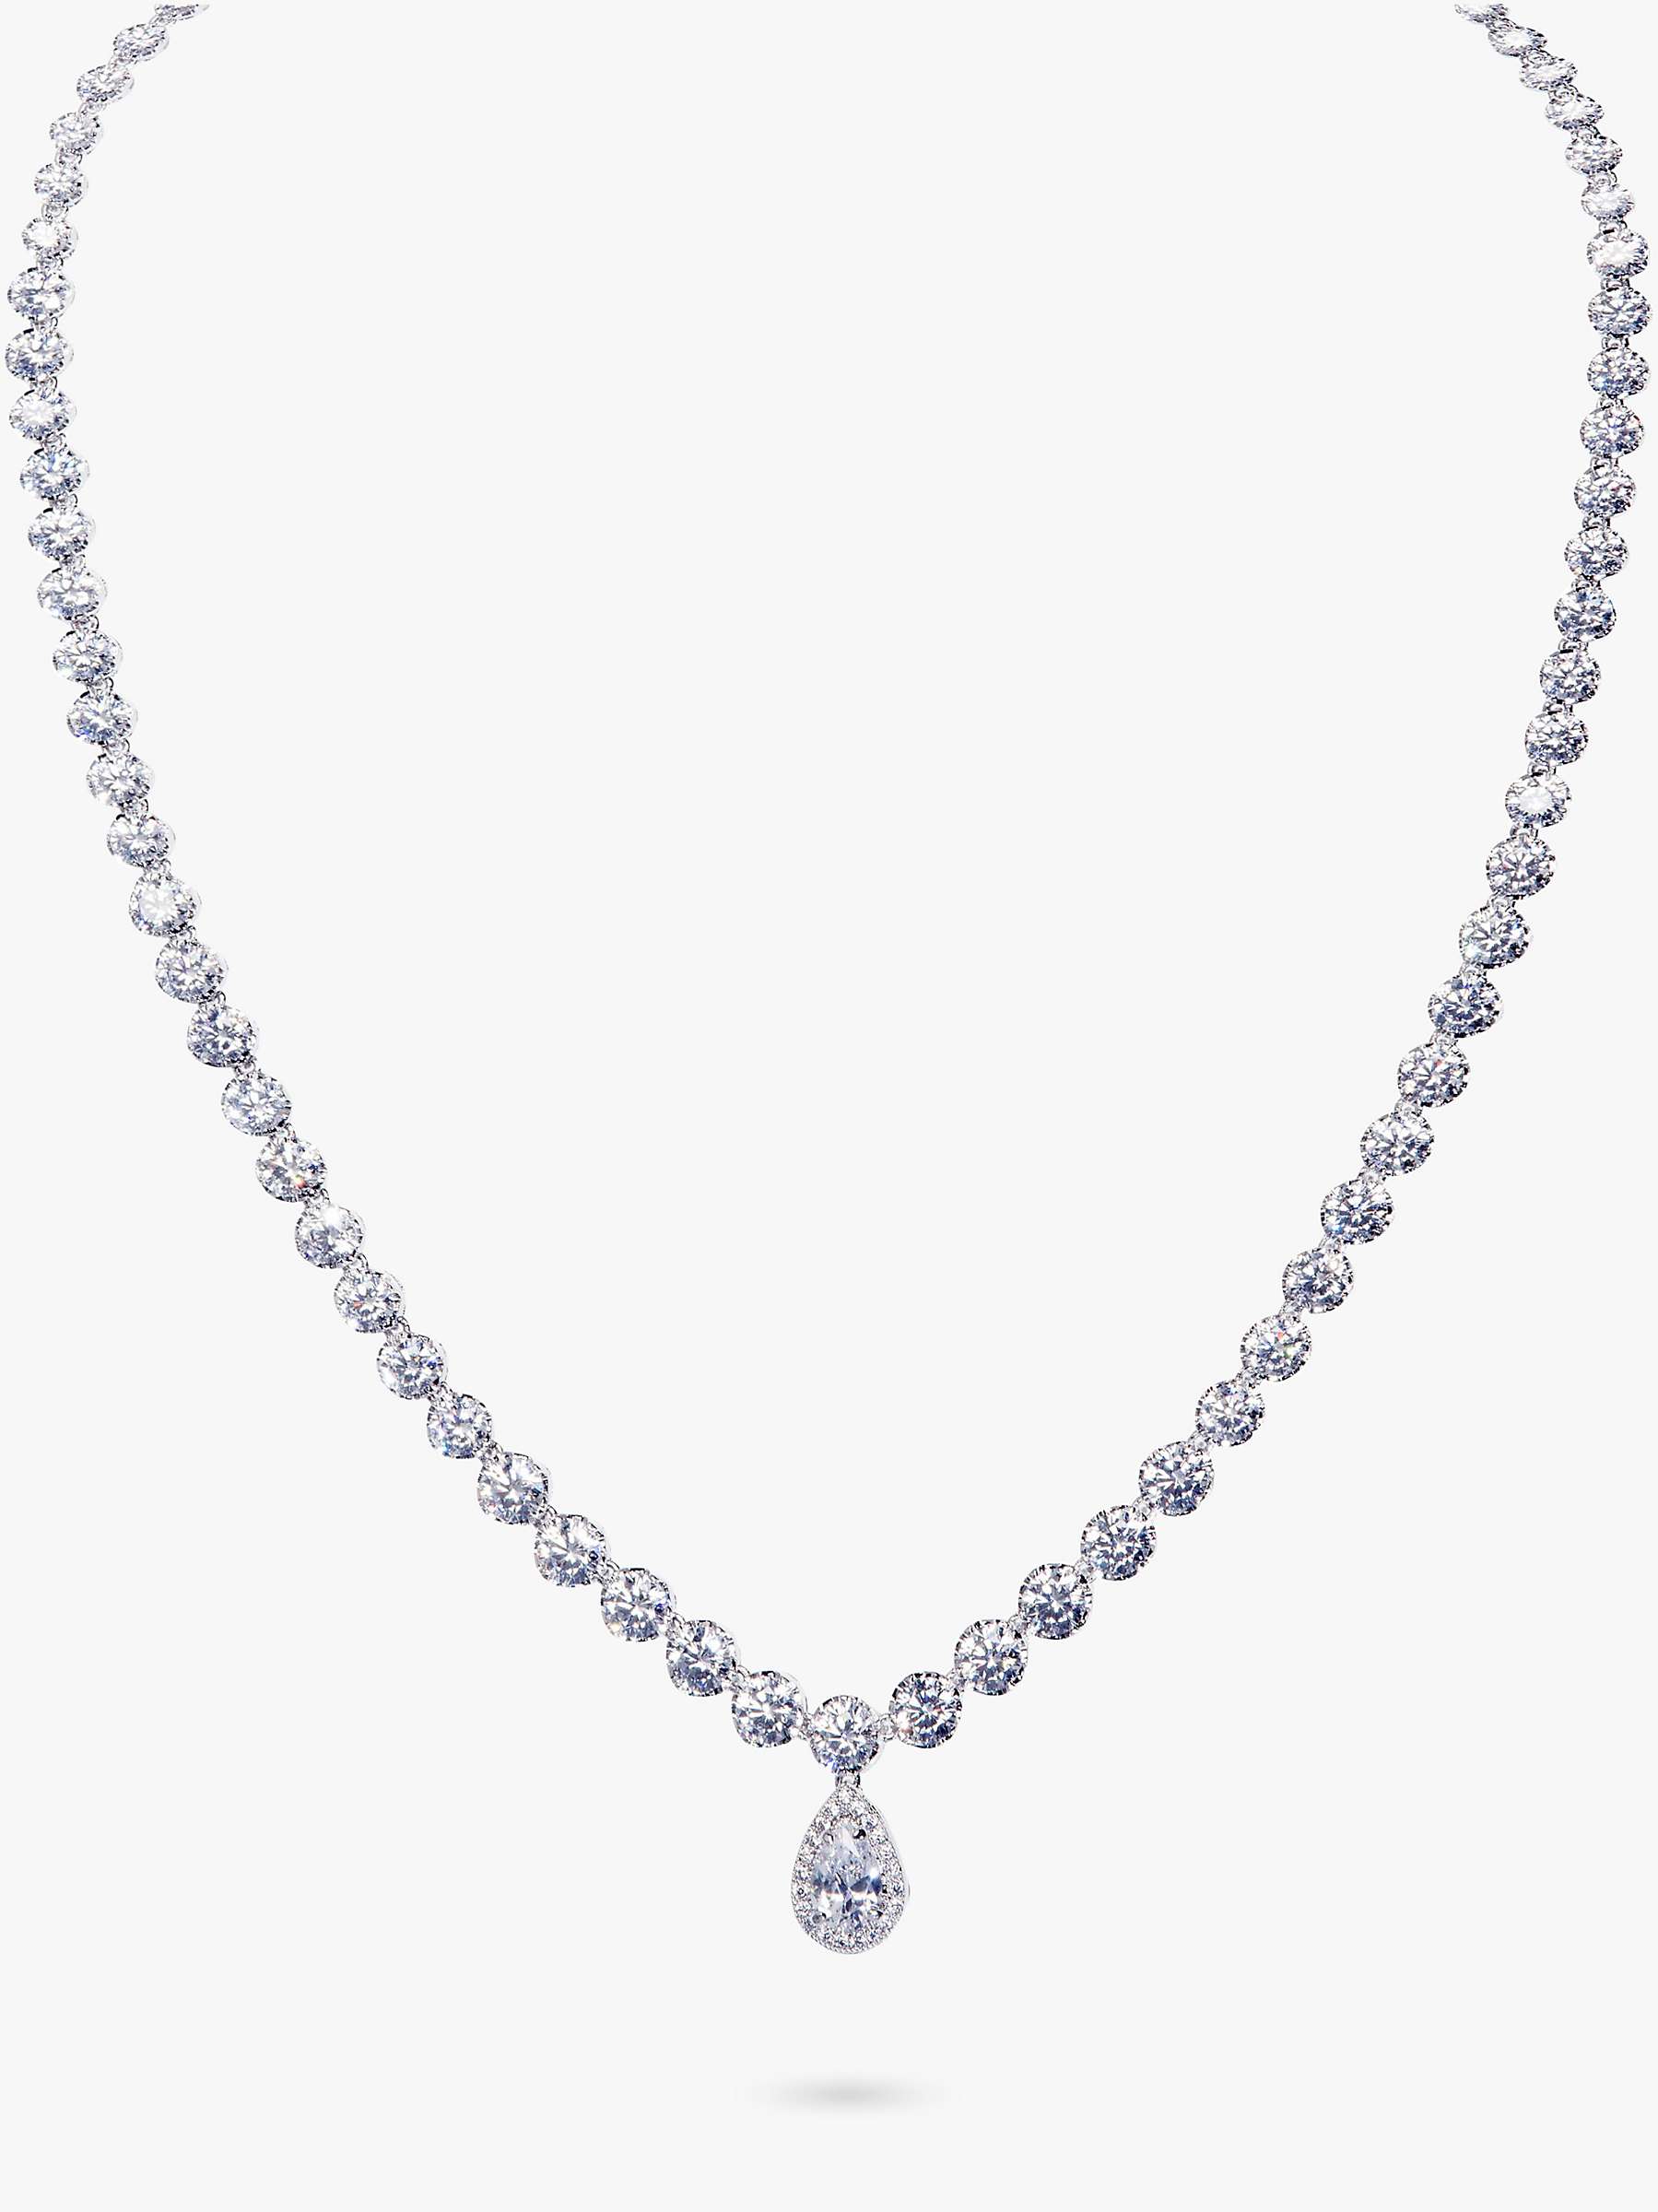 Buy Ivory & Co. Limelight Graduating Cubic Zirconia Pave Necklace, Silver Online at johnlewis.com